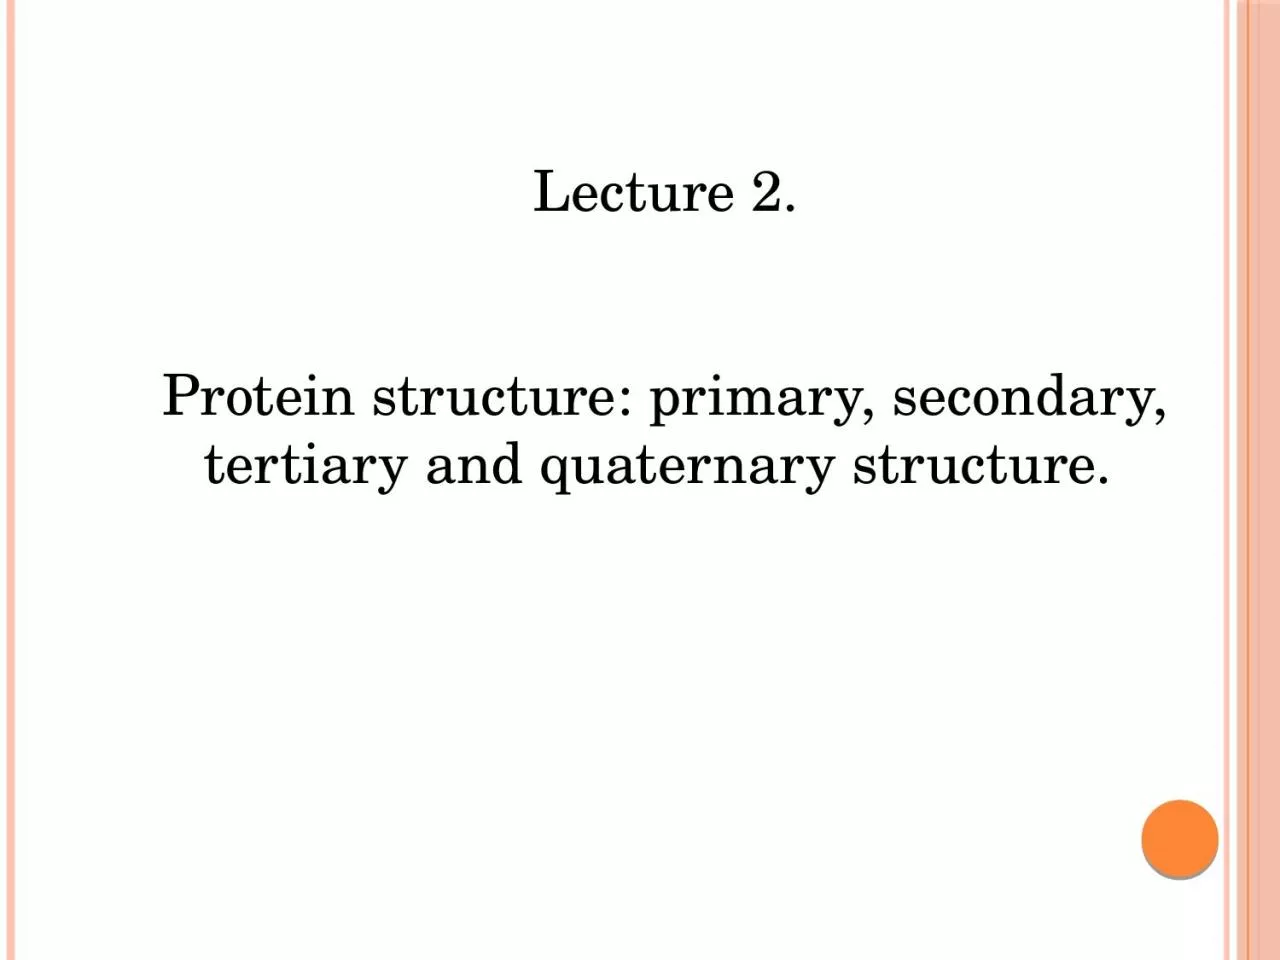 Lecture 2. Protein structure: primary, secondary, tertiary and quaternary structure.